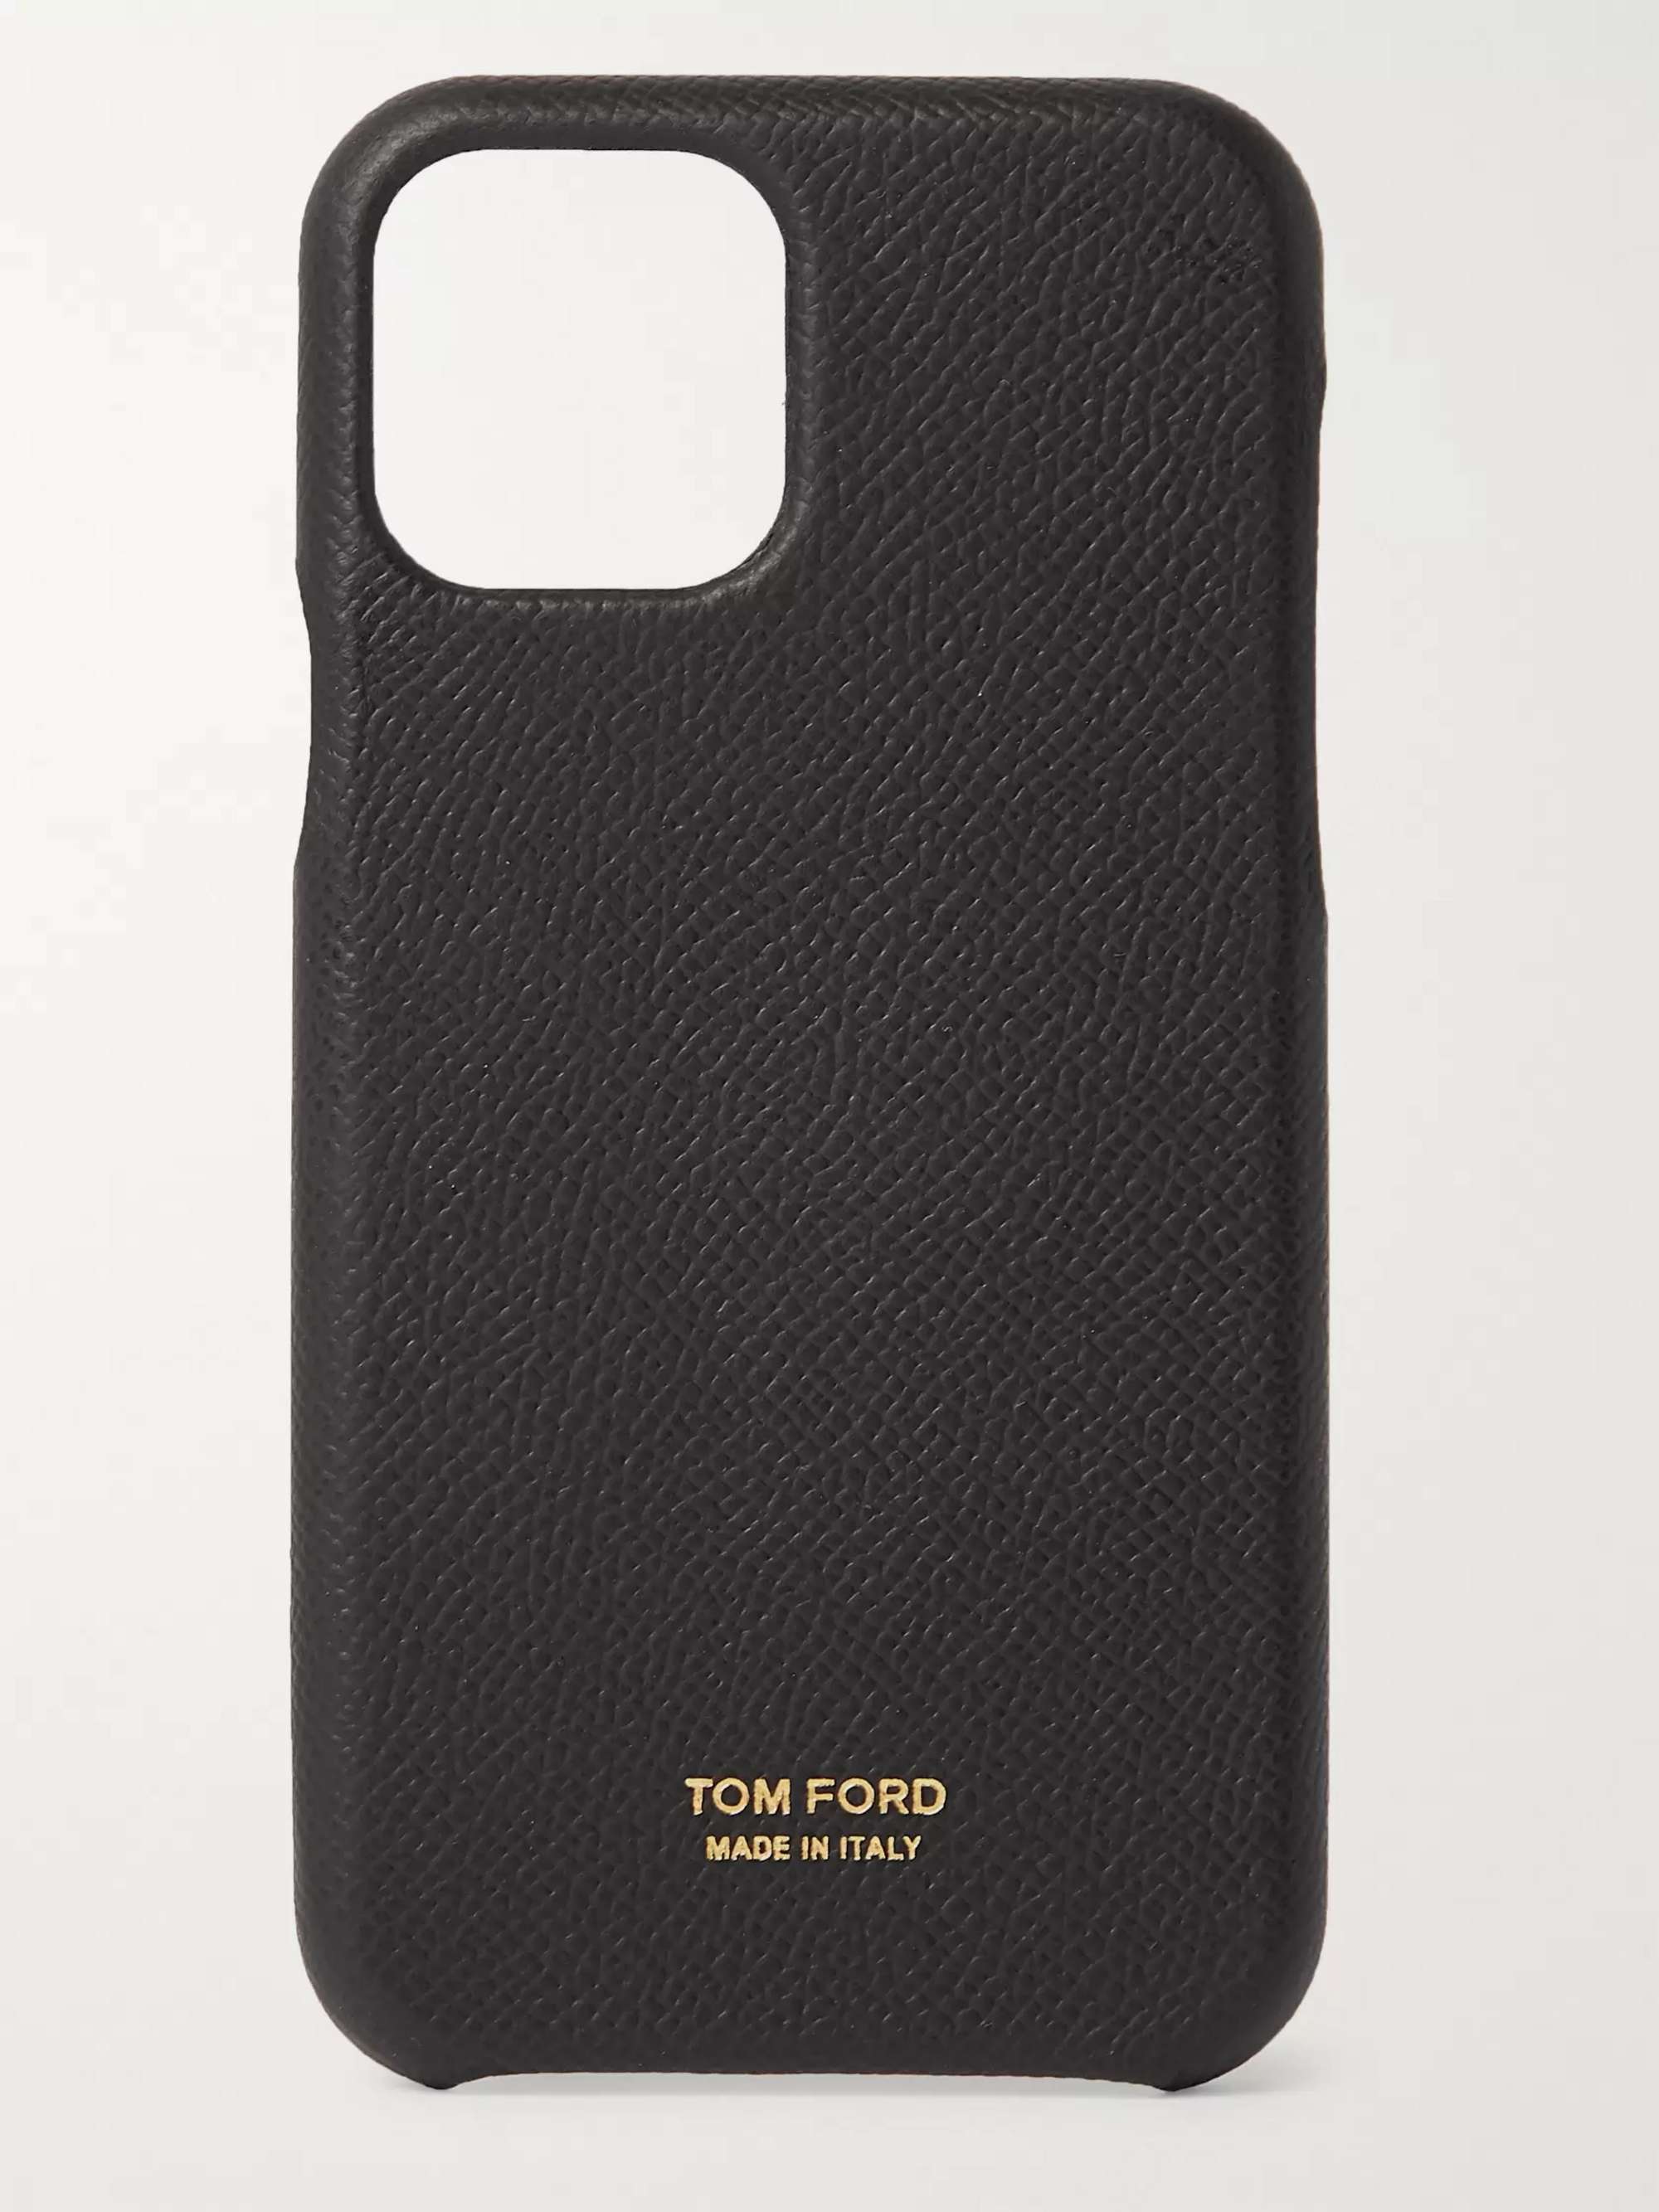 TOM FORD Full-Grain Leather iPhone 11 Pro Case